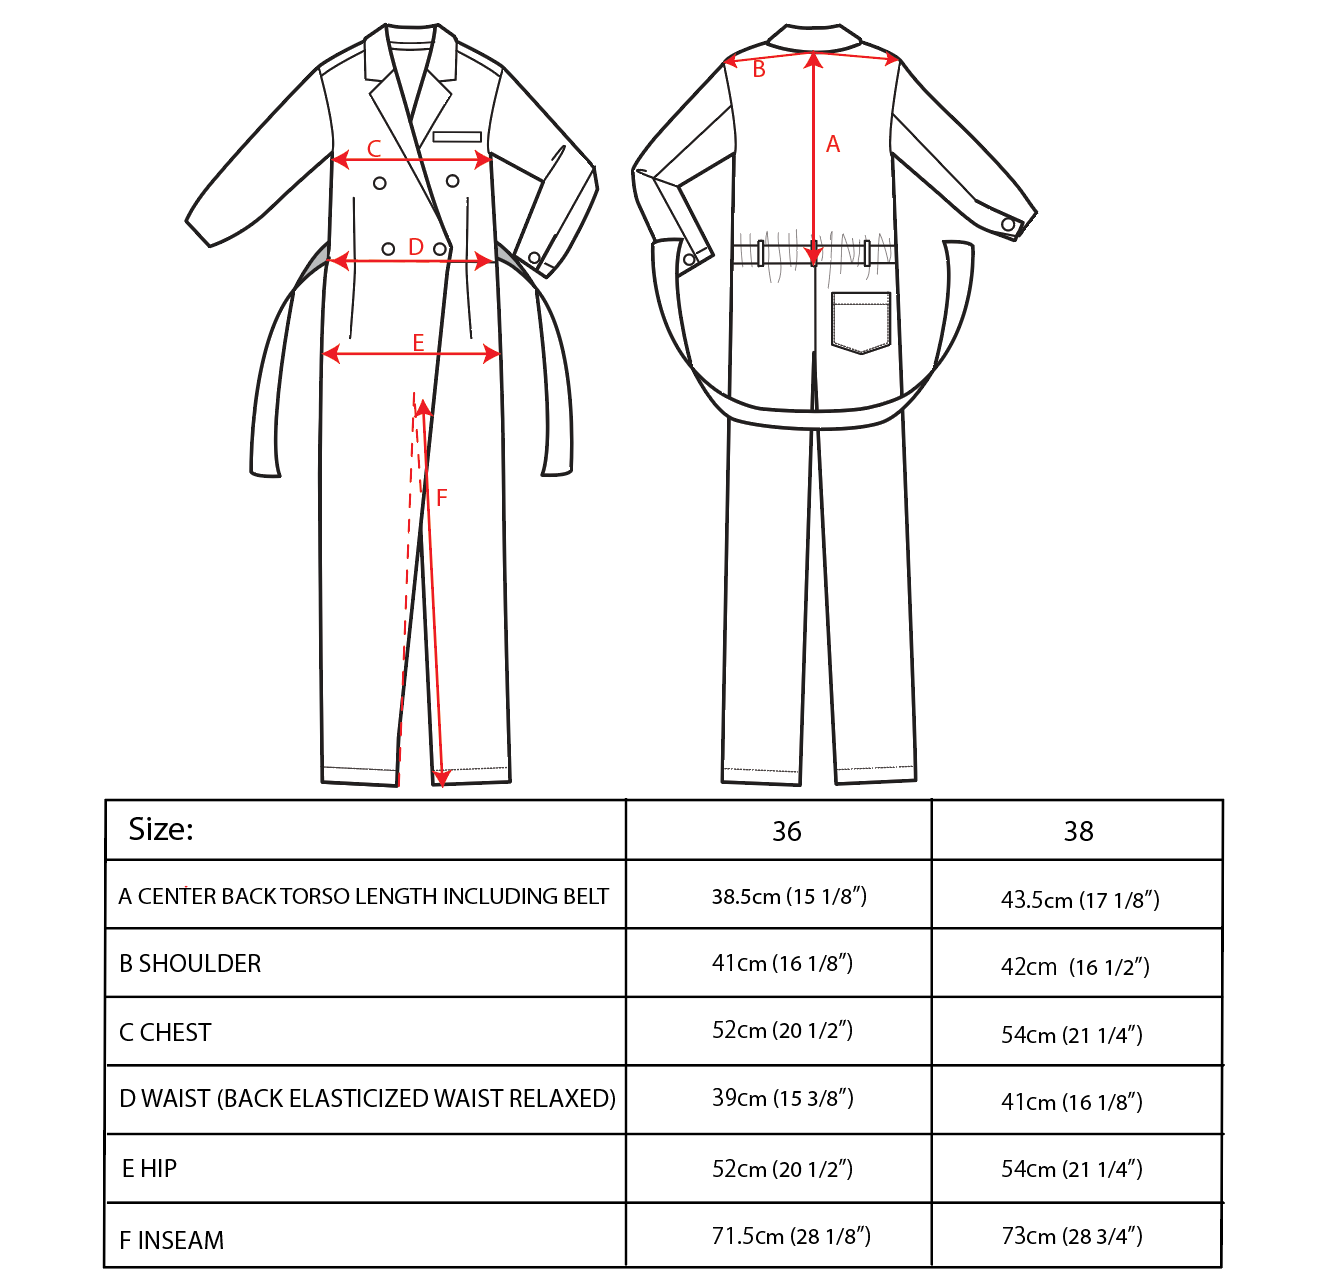 Technical illustration of a double-breasted trench coat with labeled measurement points. Includes a front view and a back view, each annotated with specific dimensions for sizes 36 and 38.